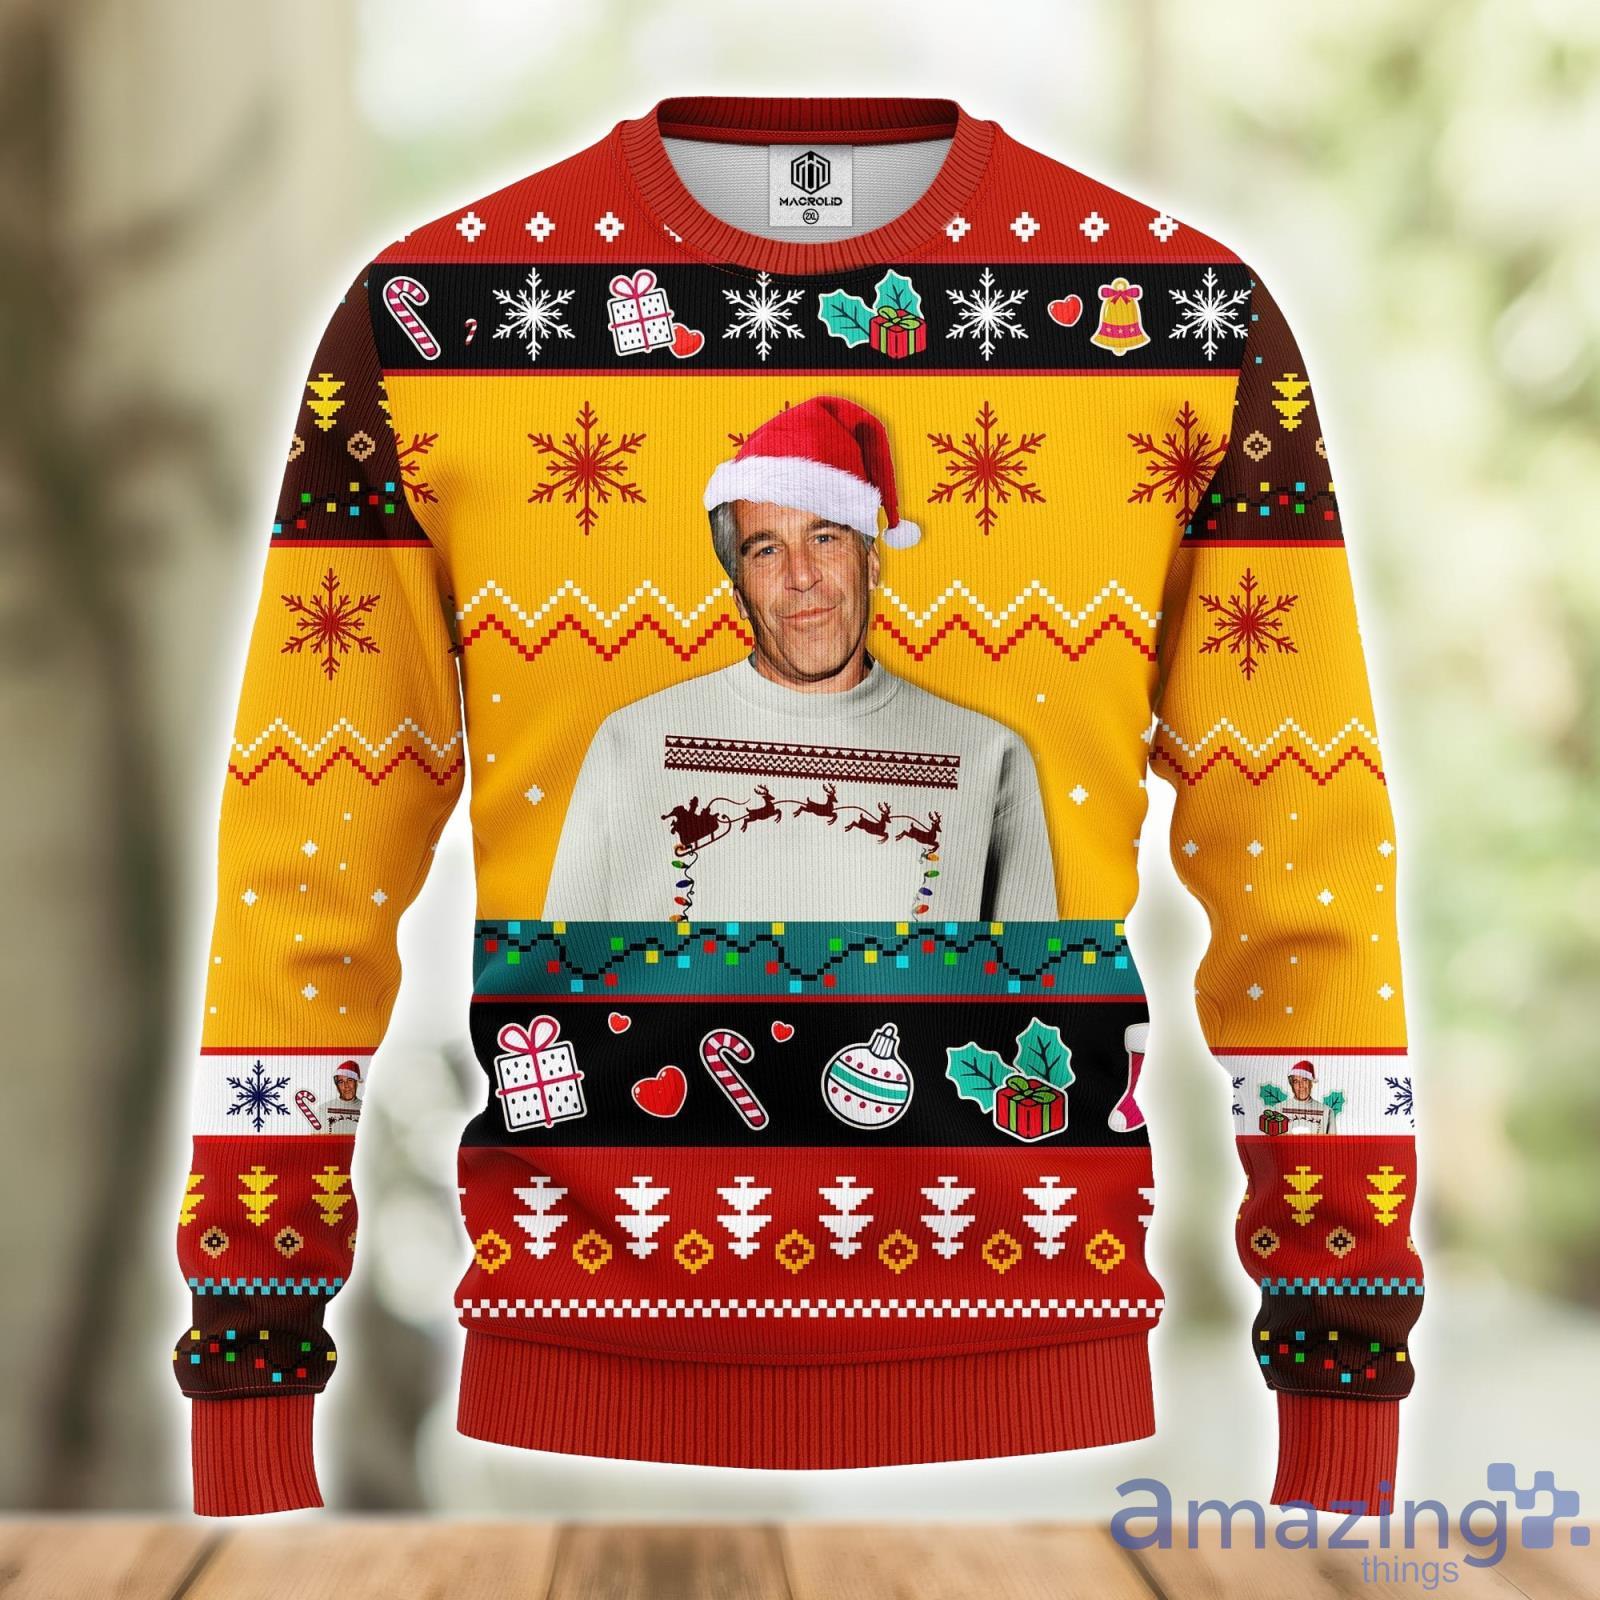 Knit Christmas Sweater - Red - Men